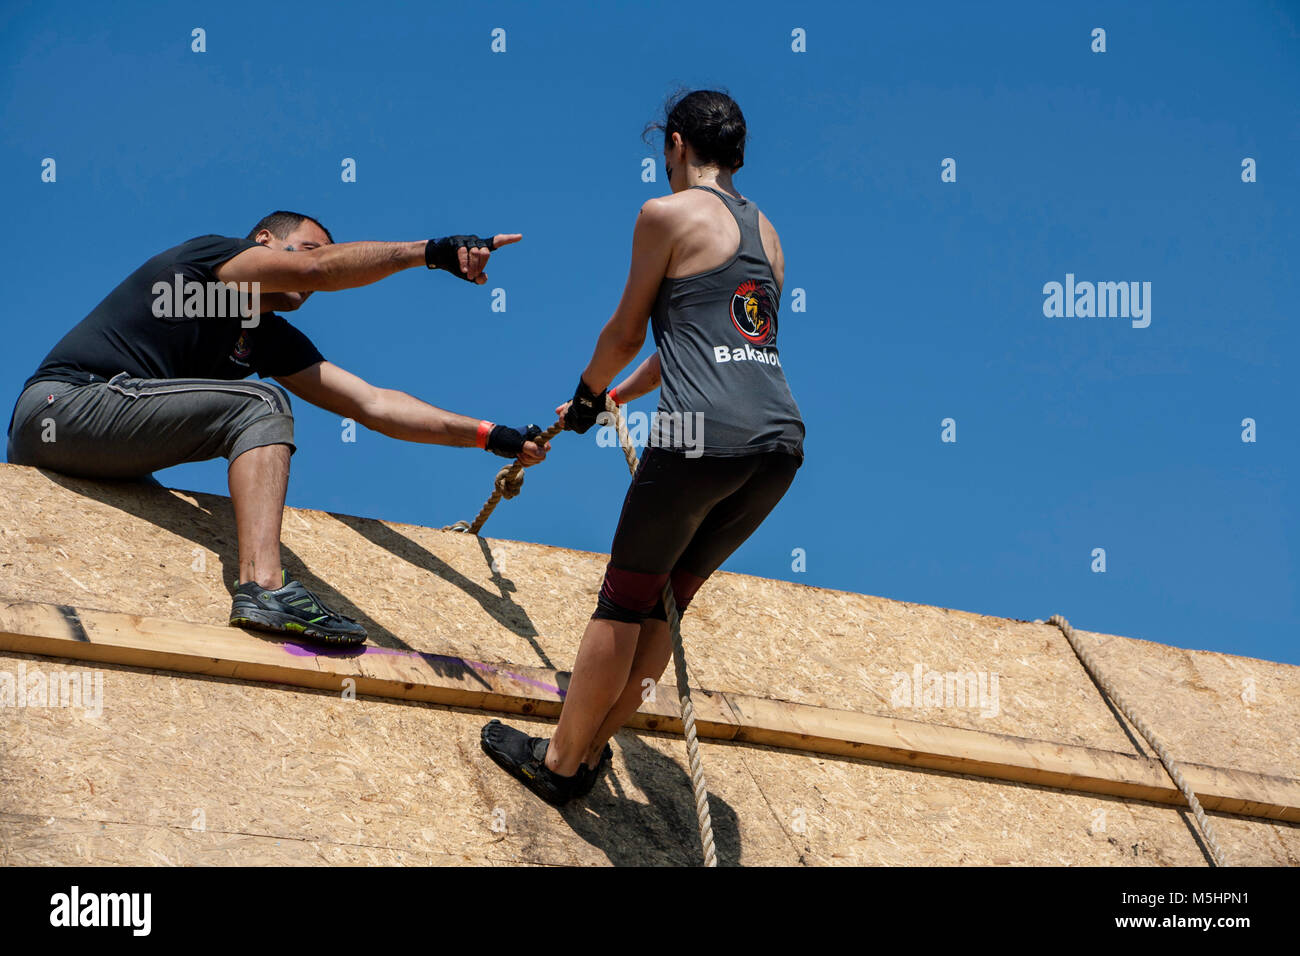 A men is helping a woman at a strength race Legion Run held in Sofia, Bulgaria on 26 July 2014 Stock Photo